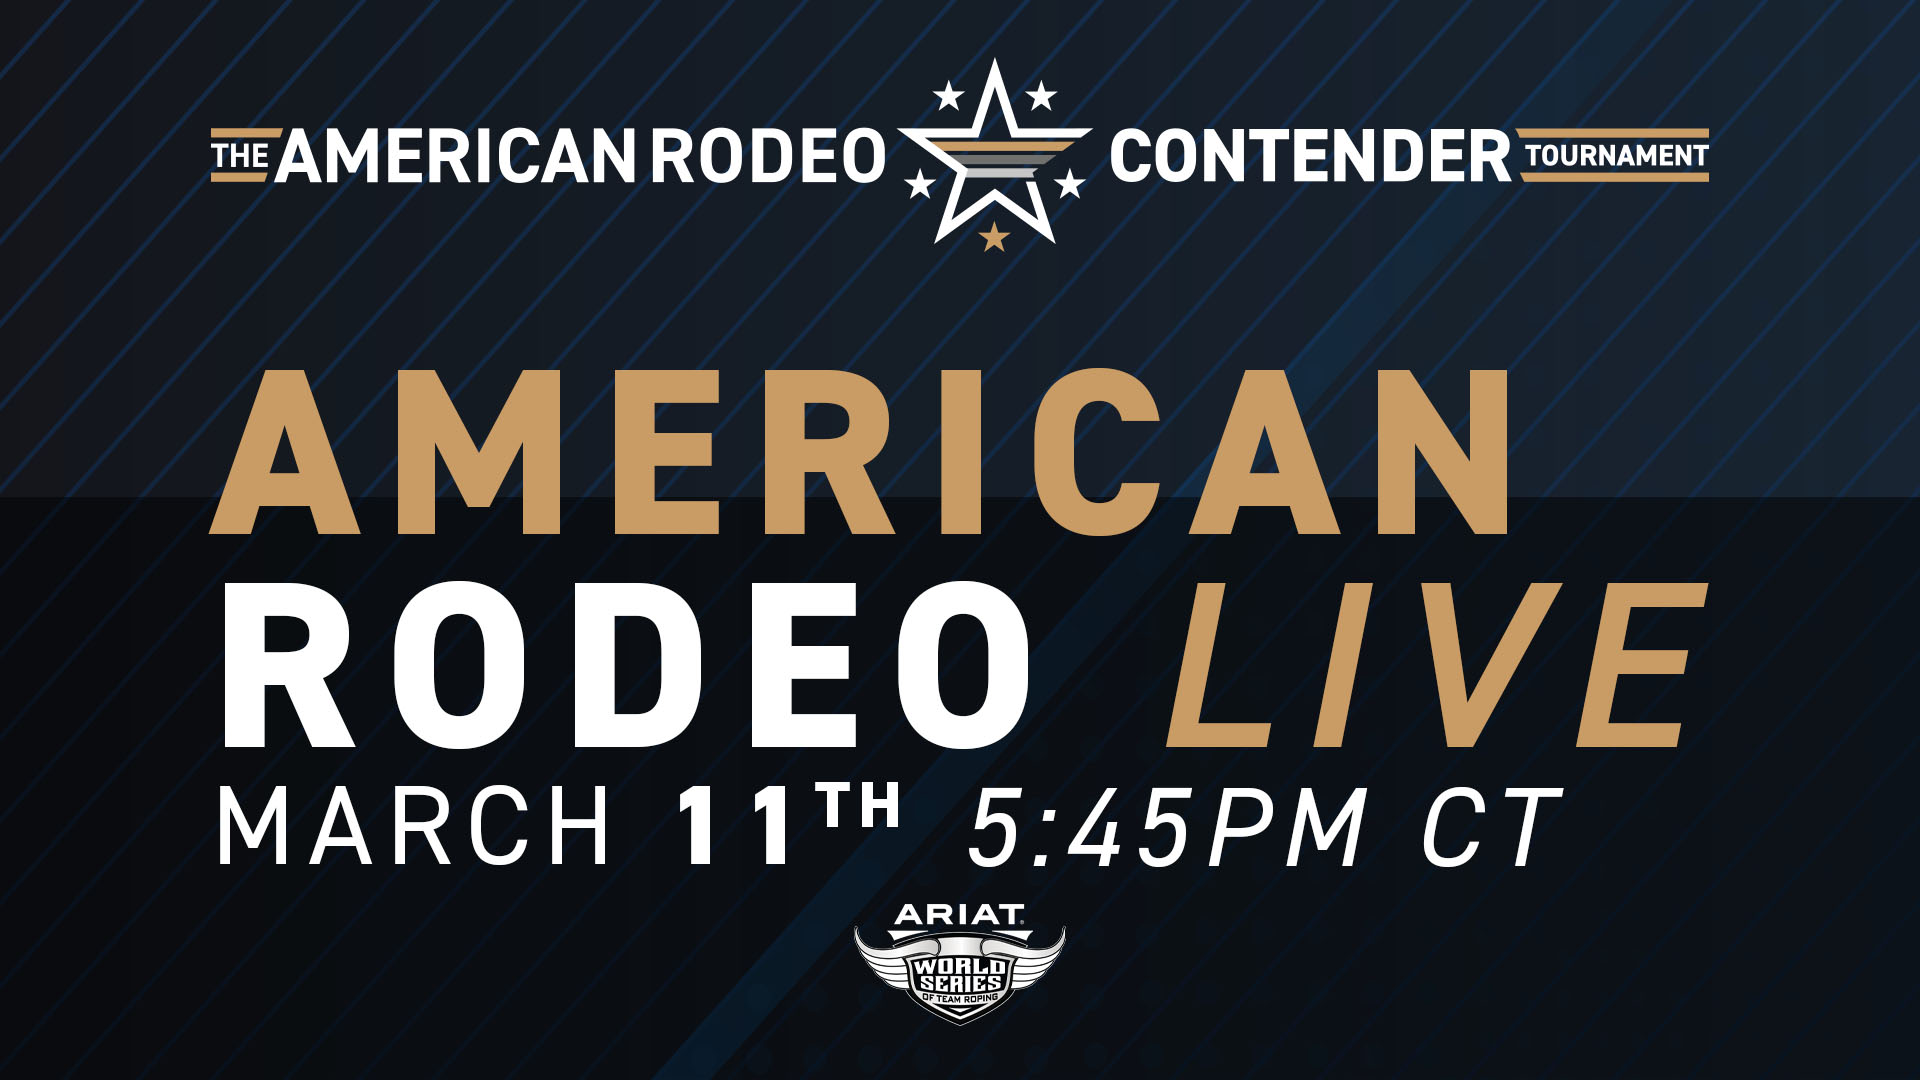 American Rodeo Contender Tournament: American Rodeo Live. March 11 at 5:45pm central